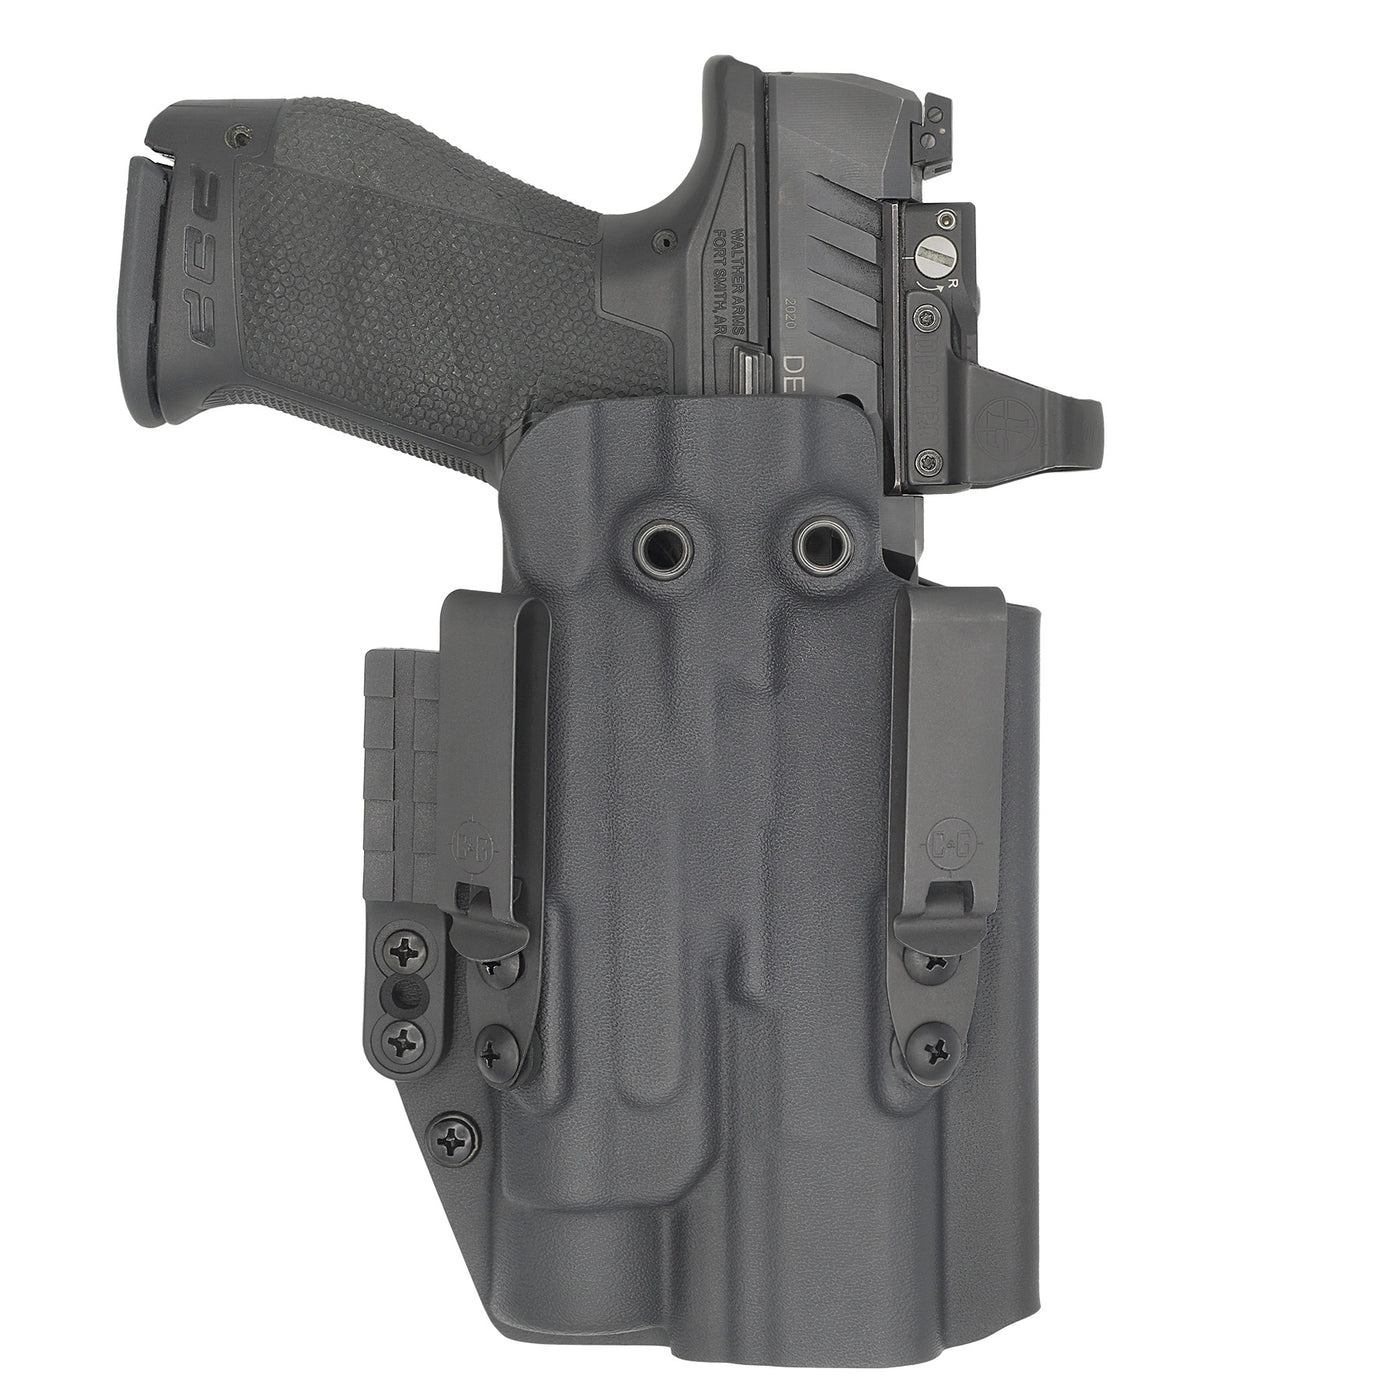 C&G Holsters Quickship IWB Tactical ALPHA UPGRADE Beretta Streamlight TLR-1 in holstered position